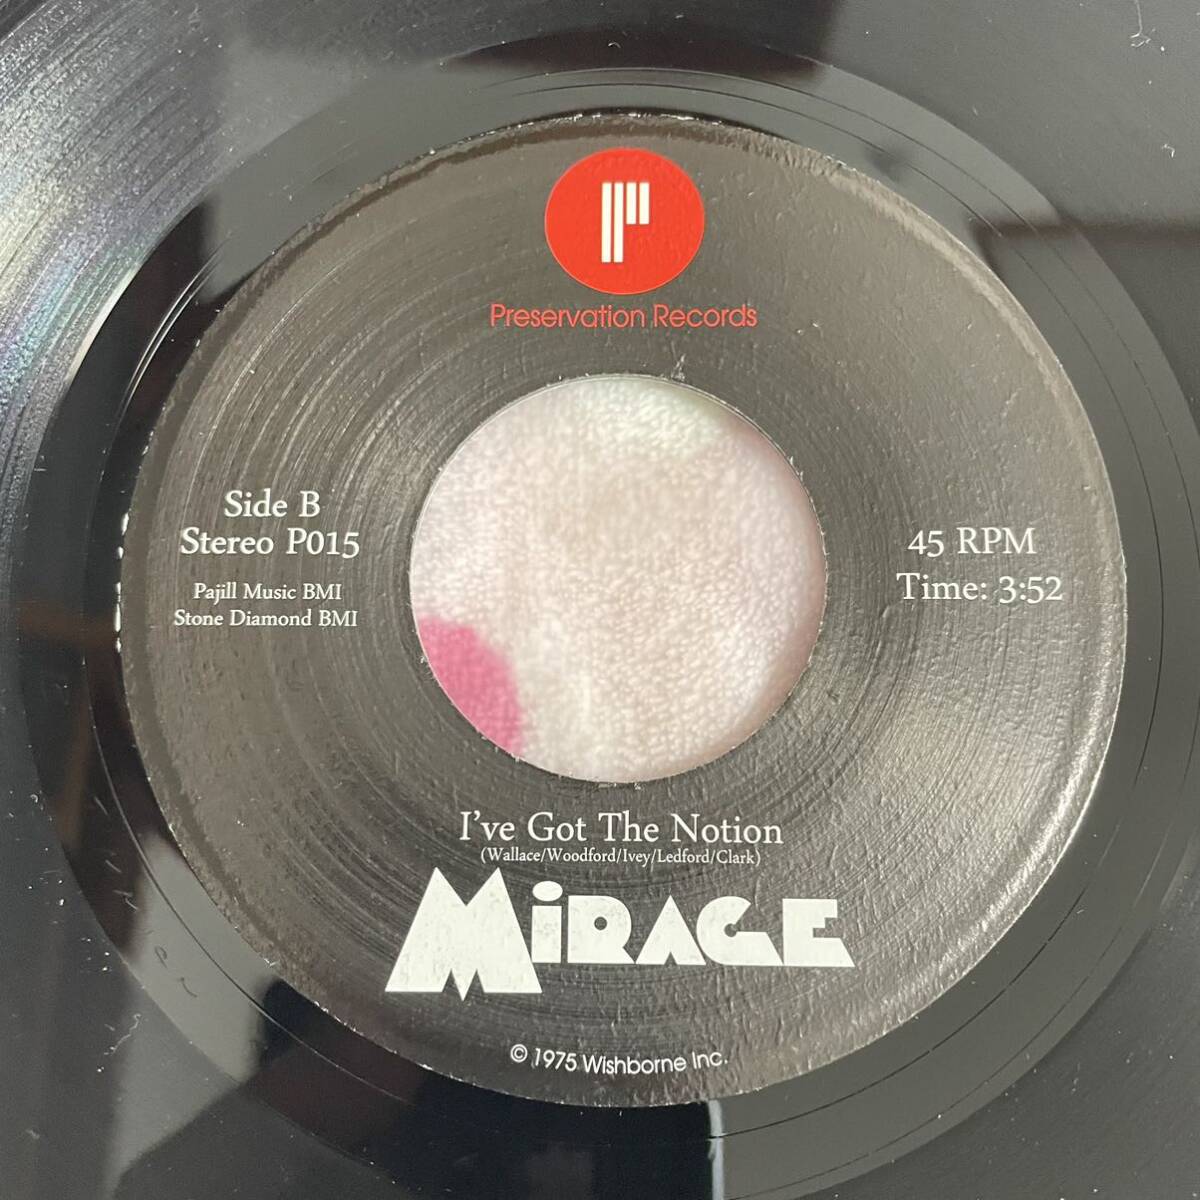 【7inch】◆即決◆中古■【MIRAGE / Bend A Little / I've Got The Notion】7インチ EP■P015 free soul funk aor light mellow Supremesの画像4